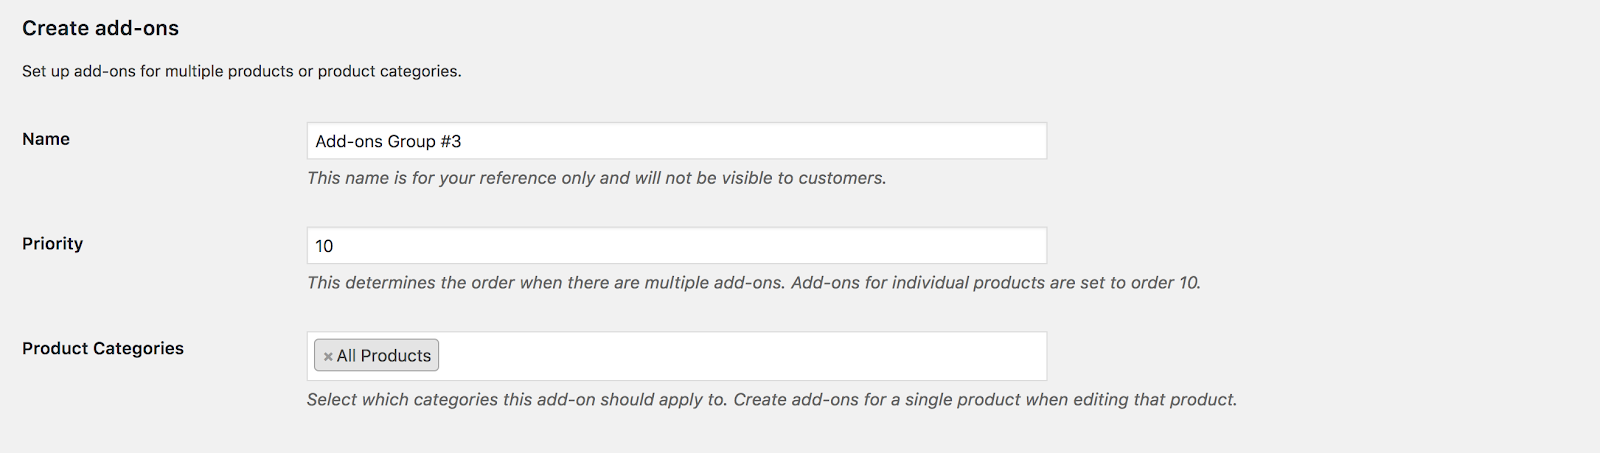 Create add-ons setting comprises Name, Priority, and Product Categories fields.